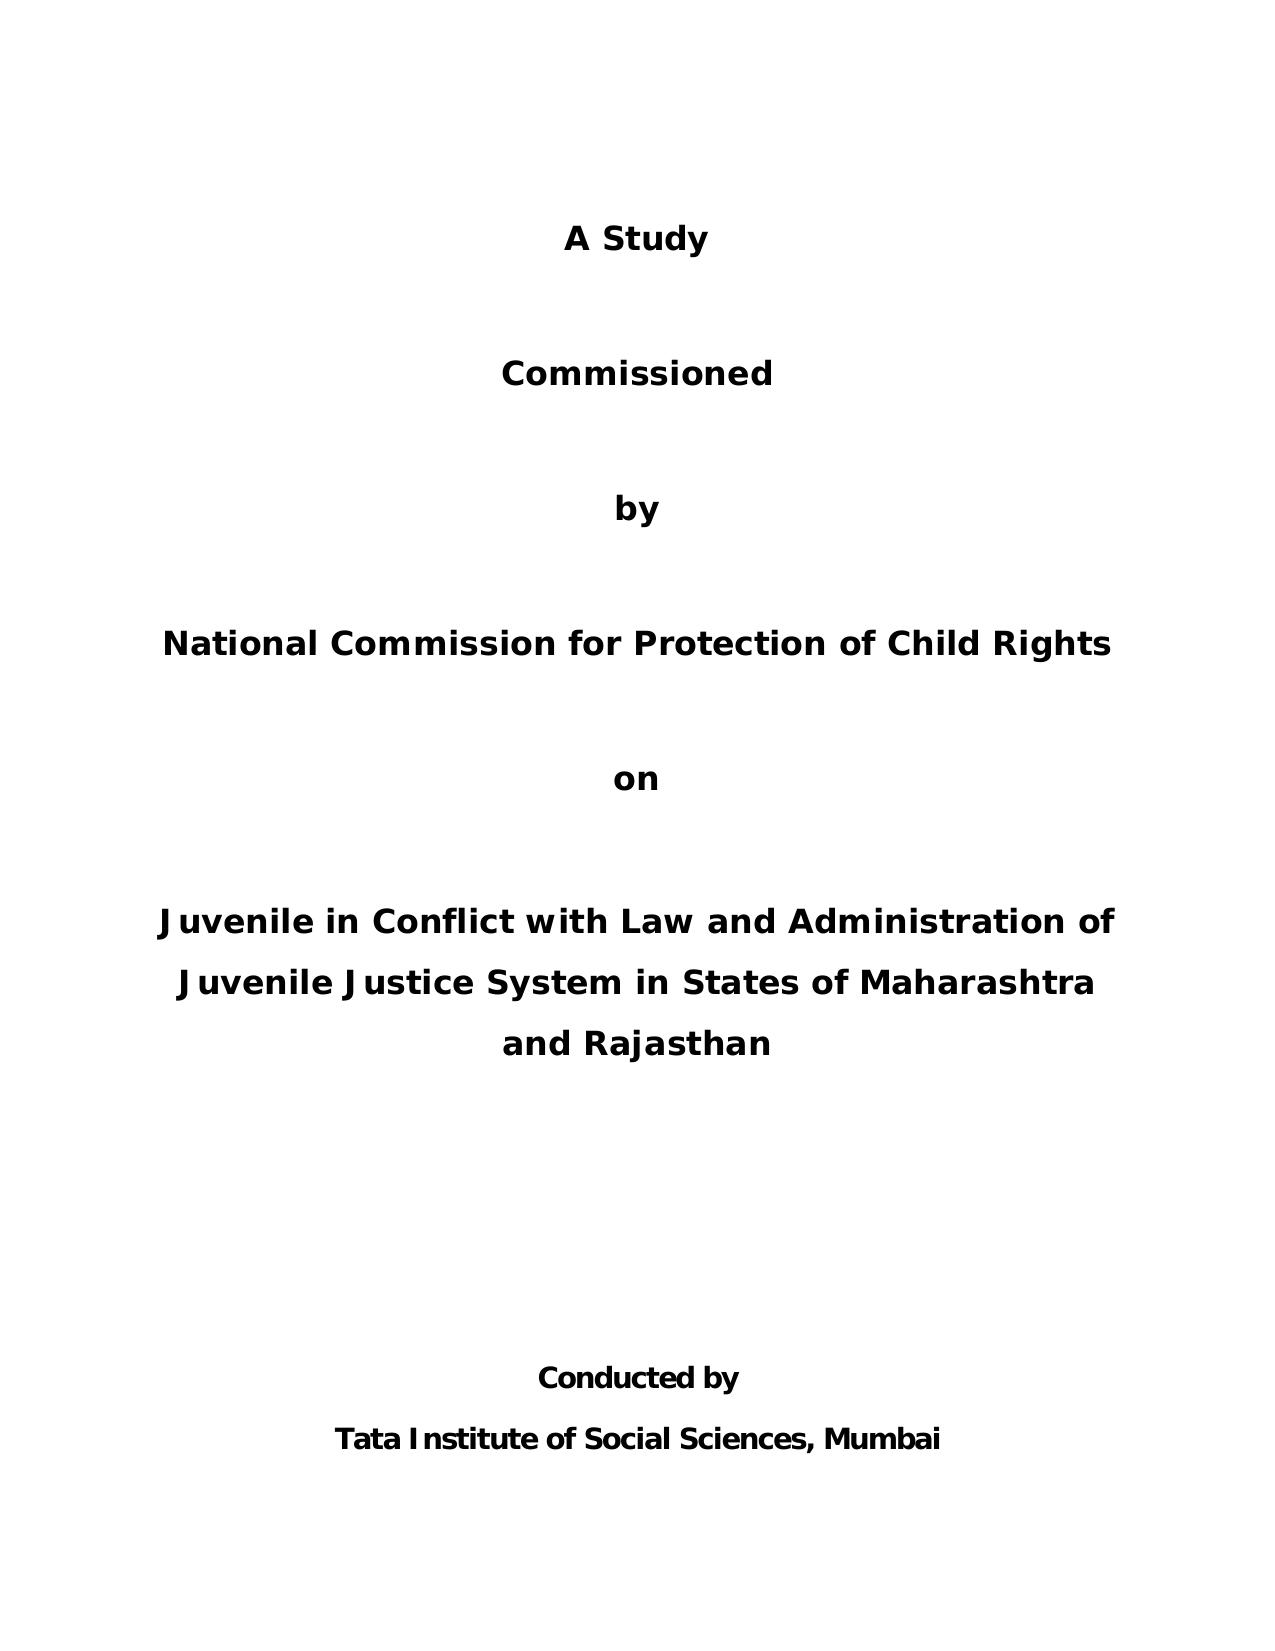 Report on Juvenile in Conflict with Law and Administration of Juvenile Justice System 2015